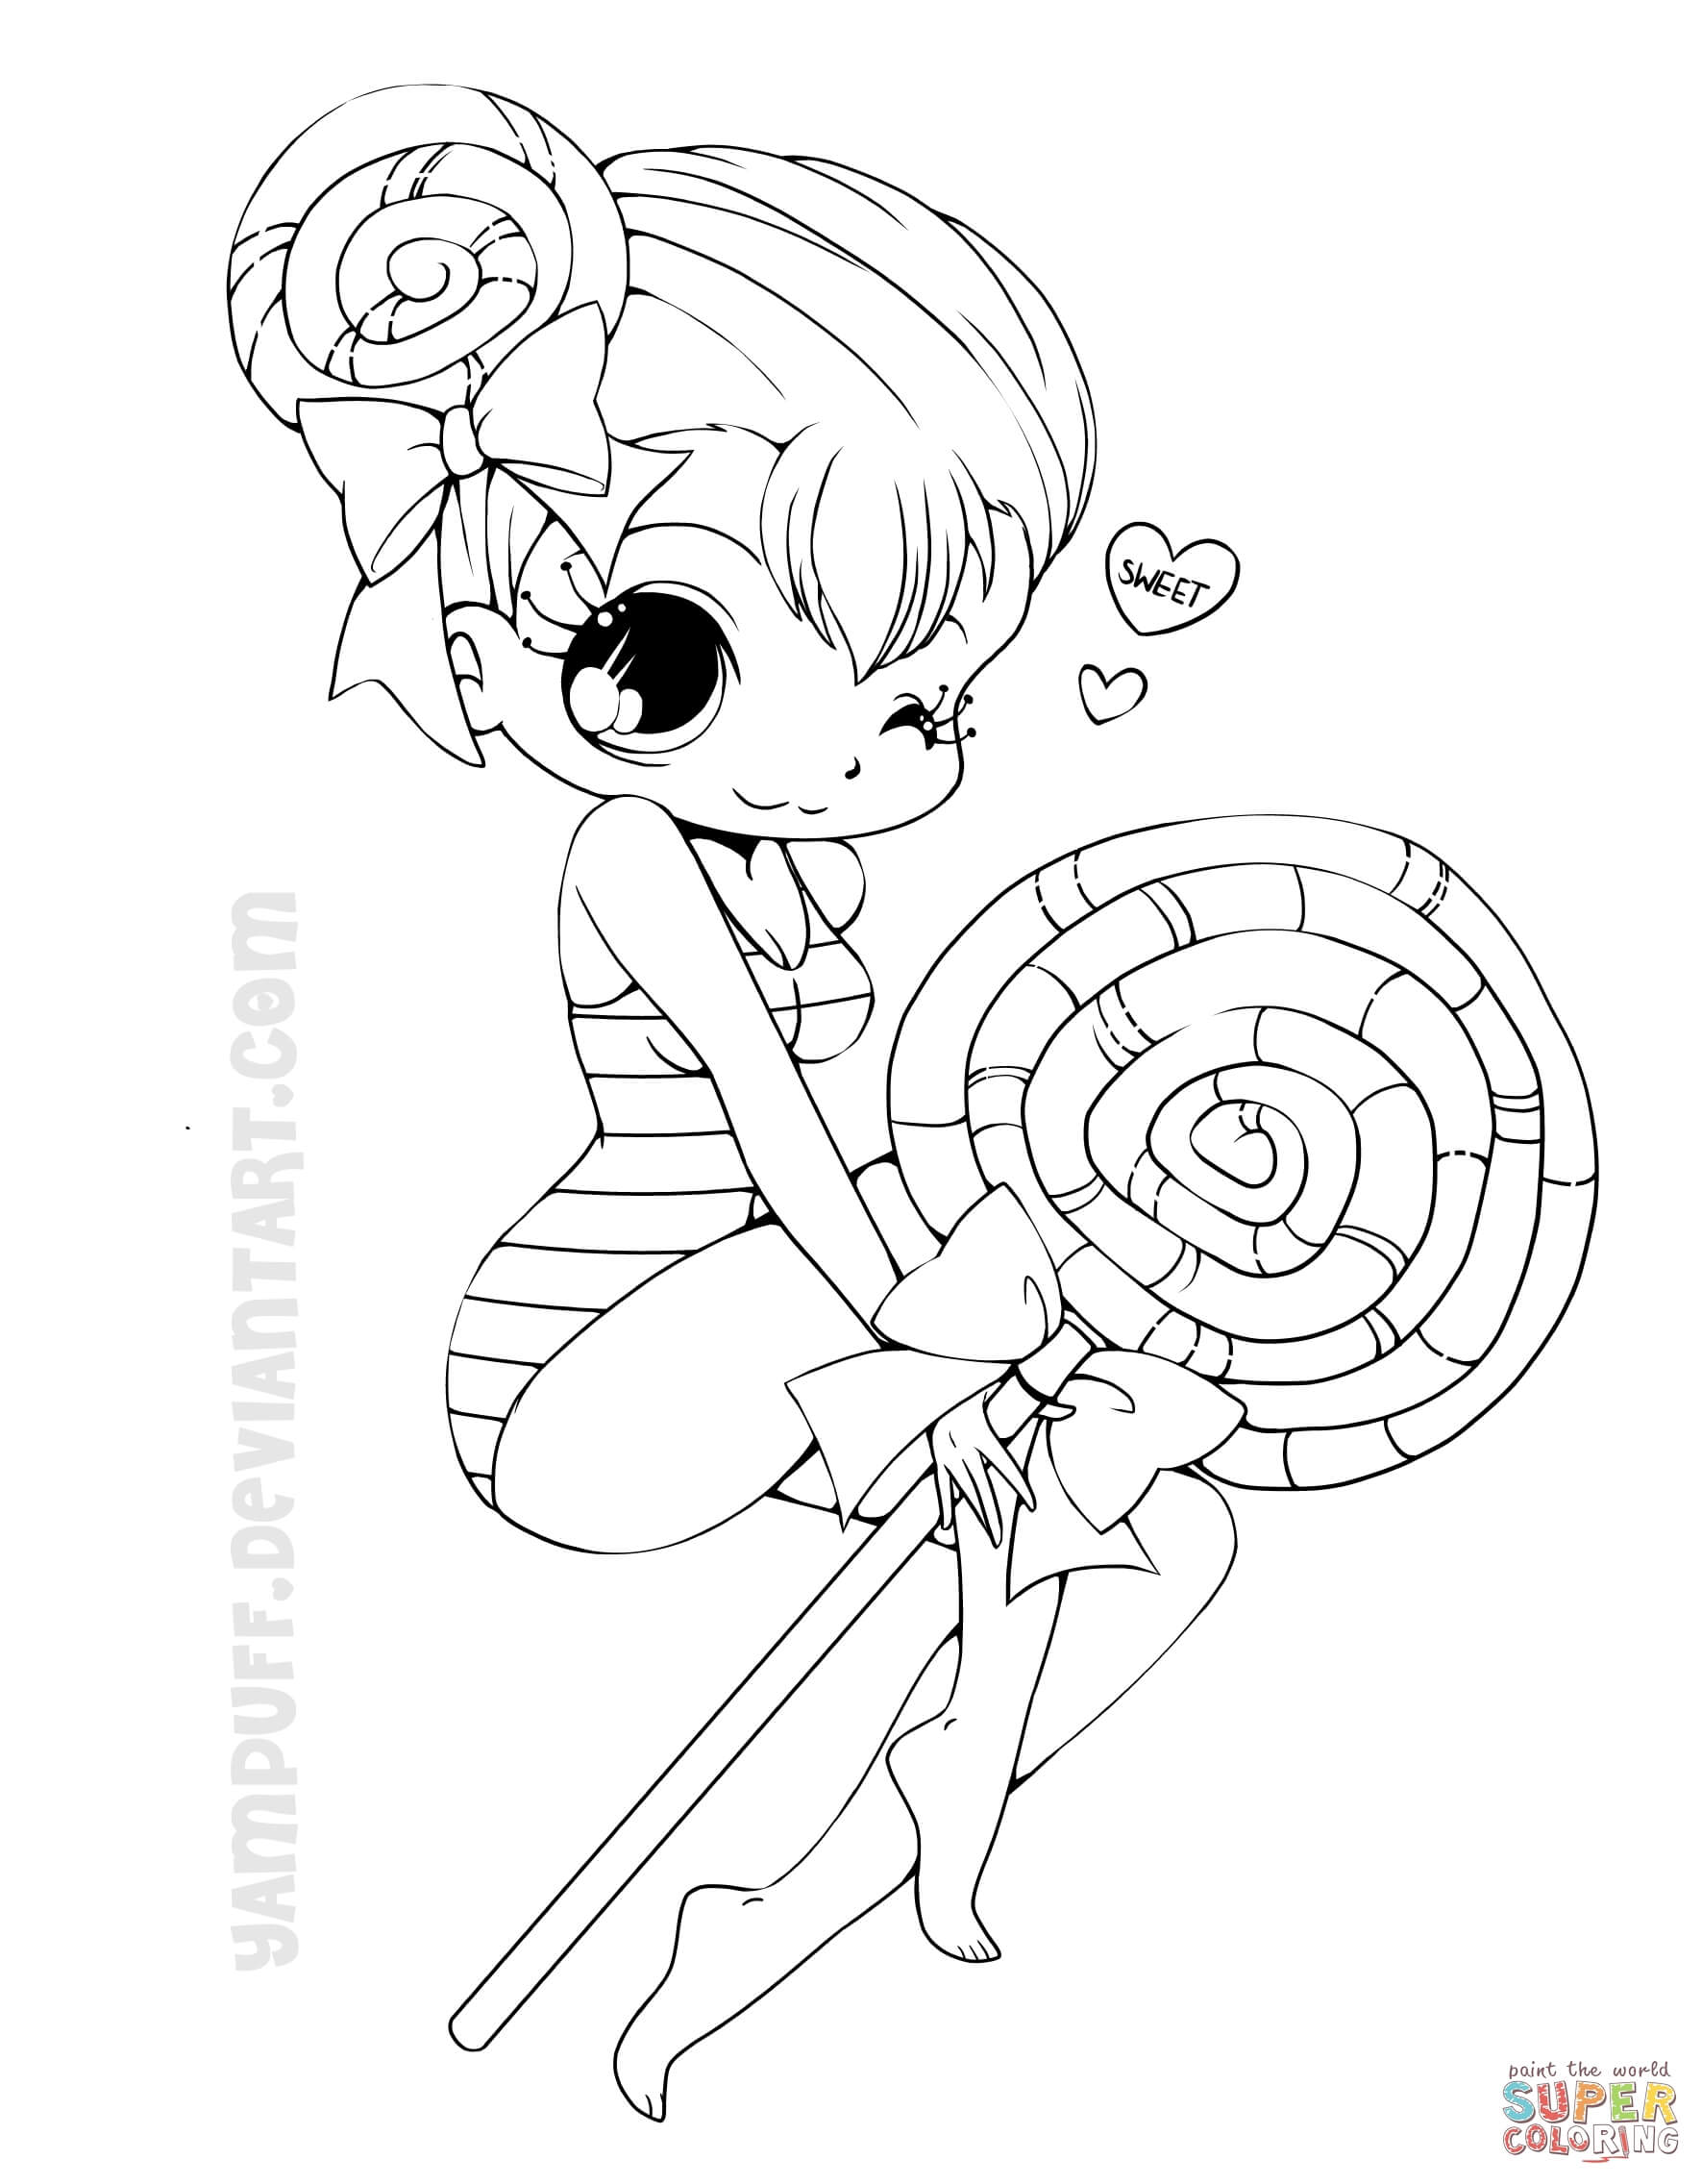 35 Most Magic Chibi Lollipop Girl Coloring Page Free Anime ...